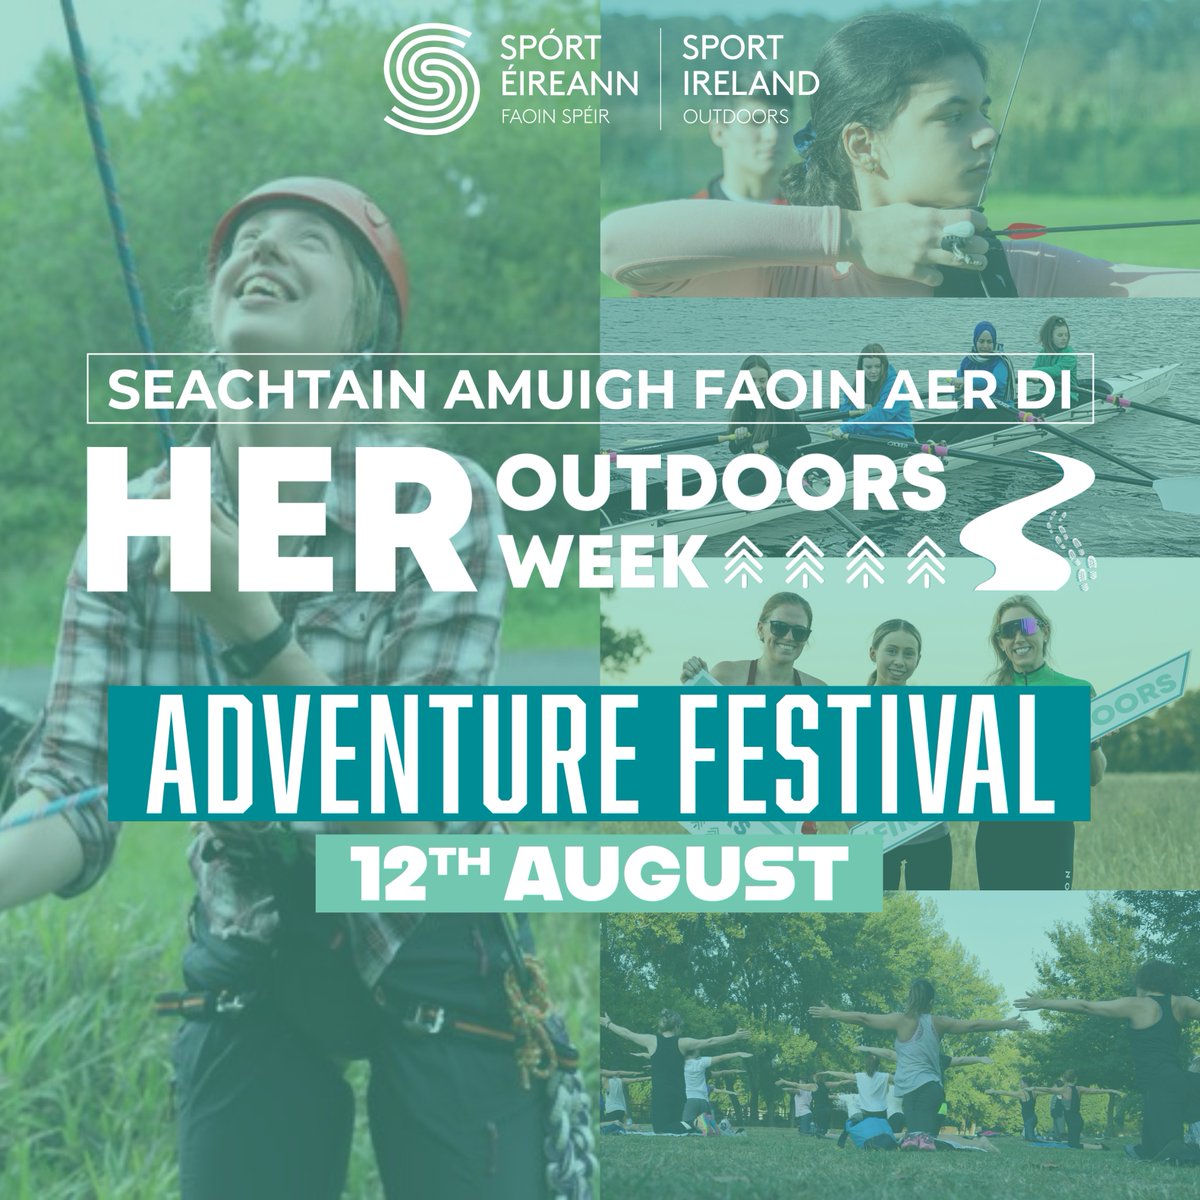 HER Outdoors Week Adventure Festival! We are kicking off HER Outdoors Week this year with a HER Outdoors Week Adventure Festival in Russborough House, Wicklow on August 12th from 10am - 4pm! Book your tickets now! bit.ly/3rt8dU1 #HEROutdoorsWeek